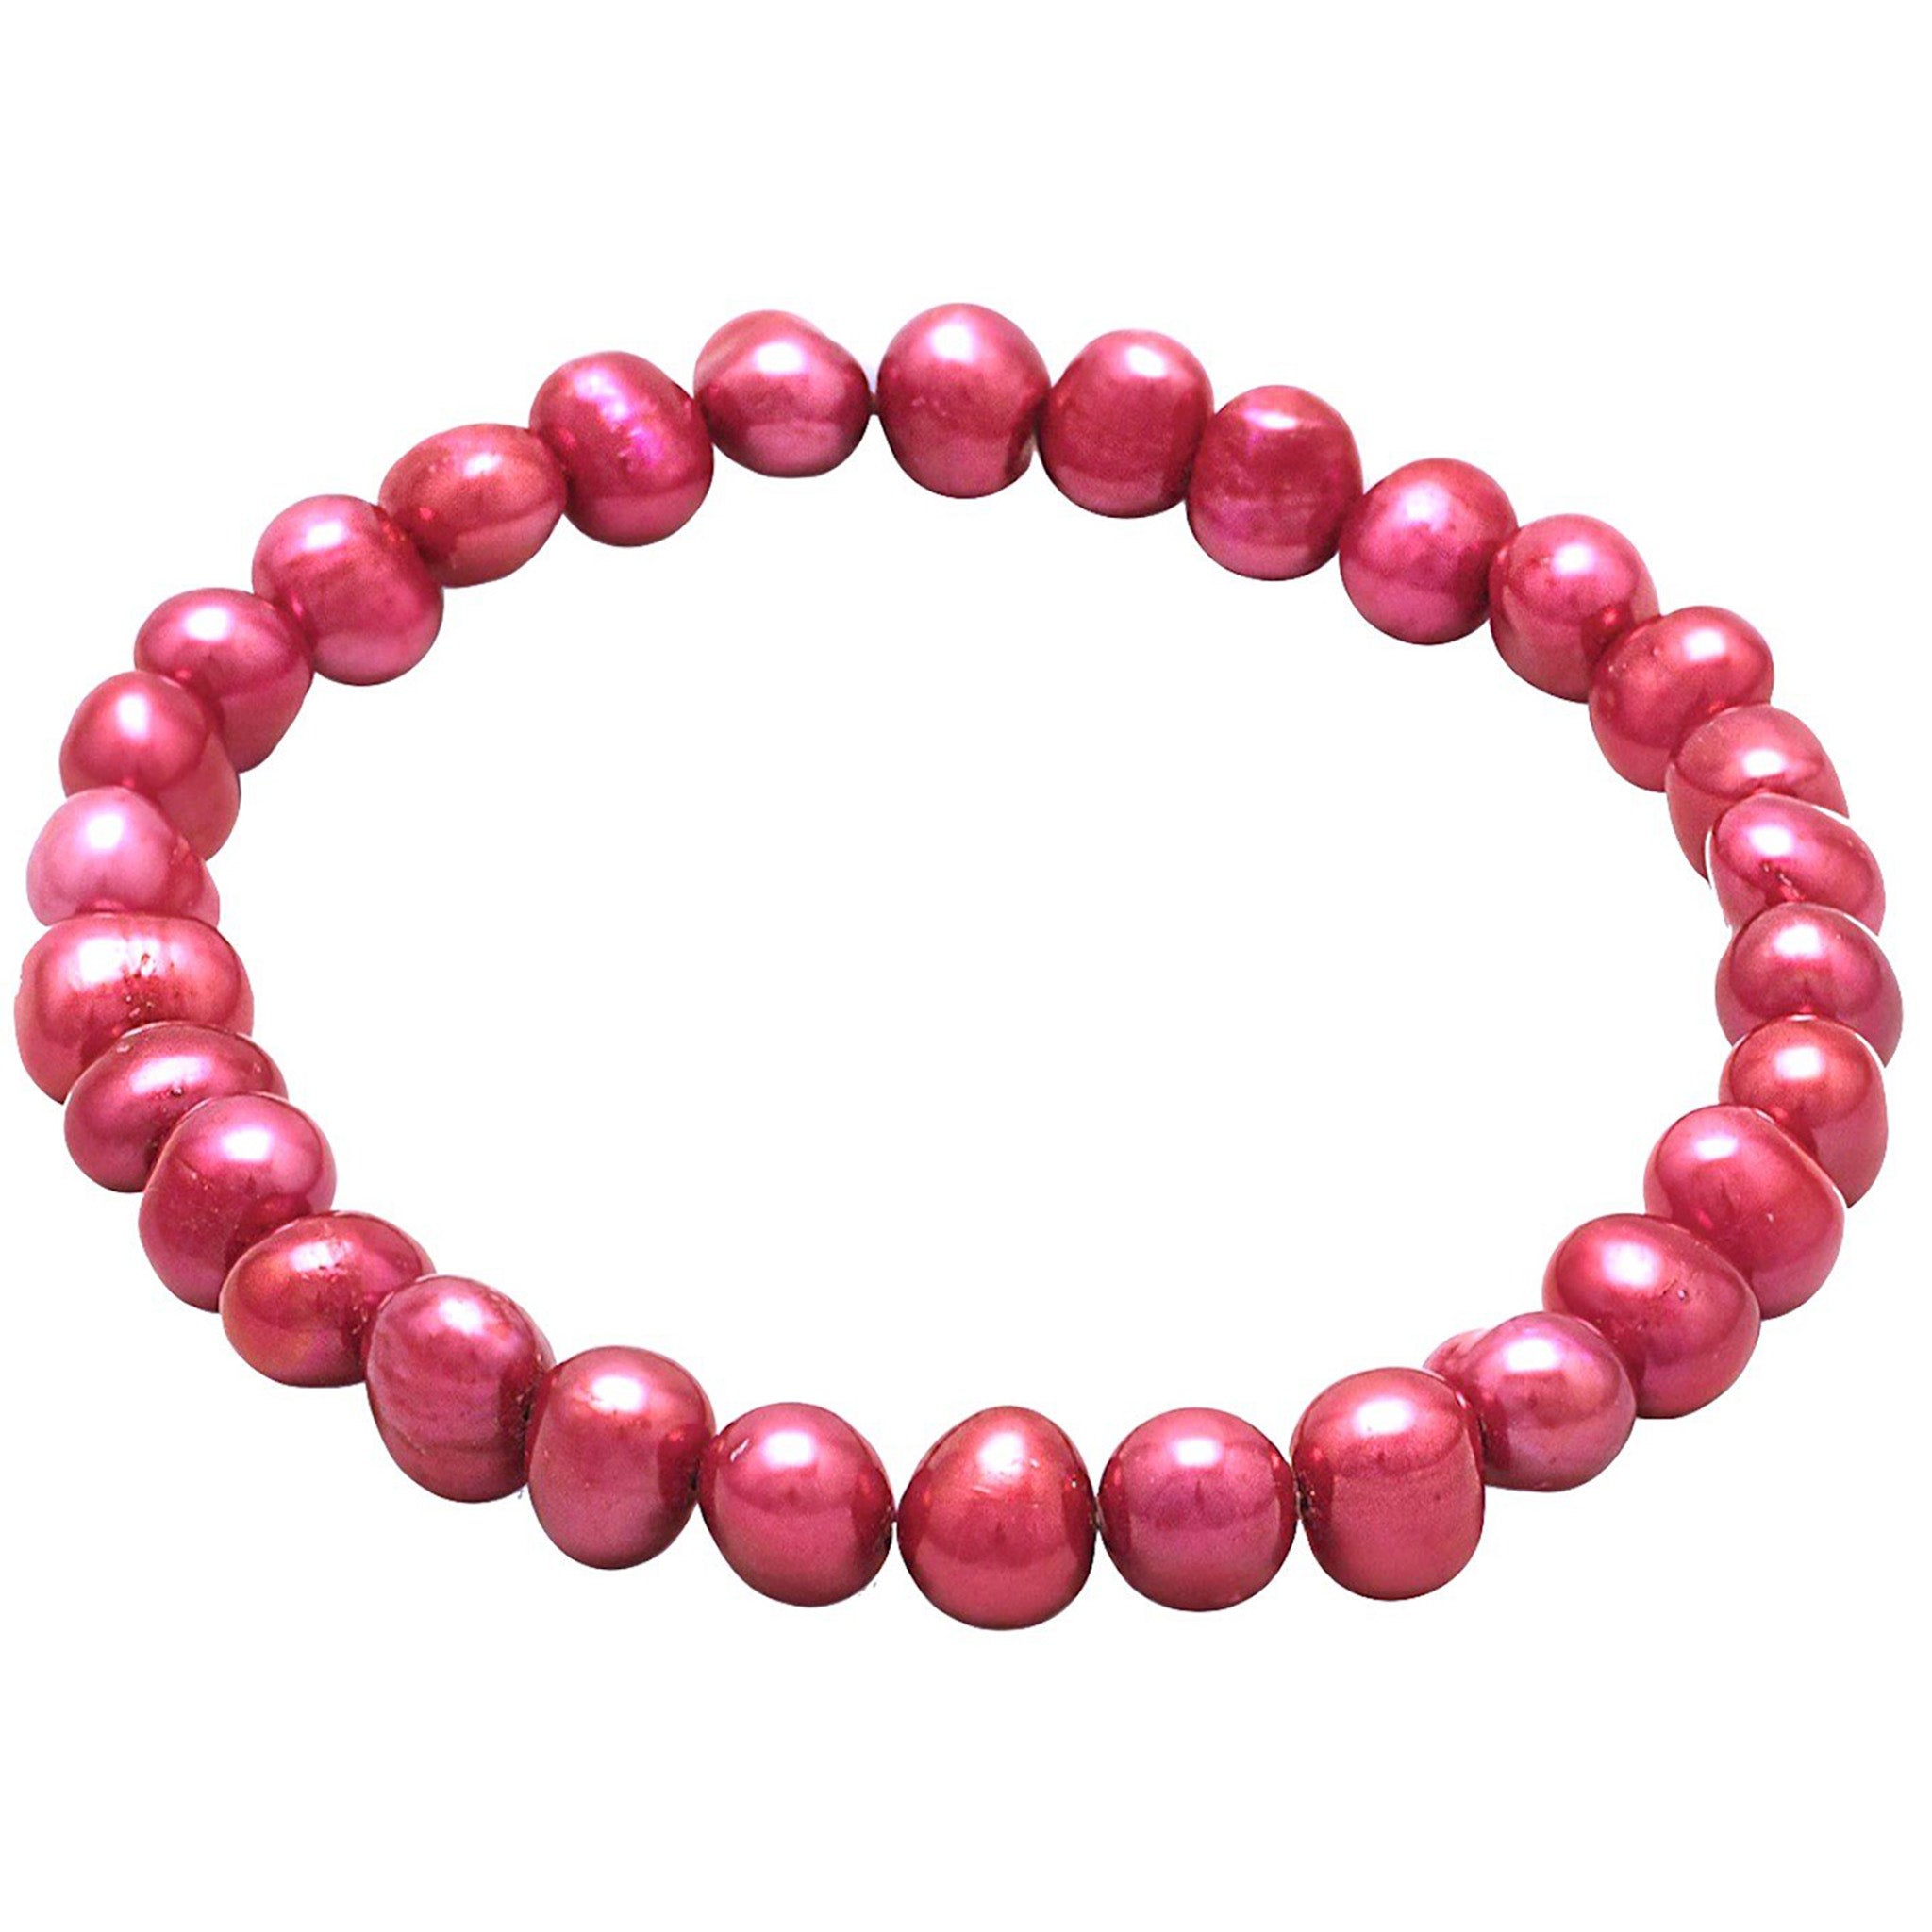 Red Freshwater Pearl Stretch Bracelet